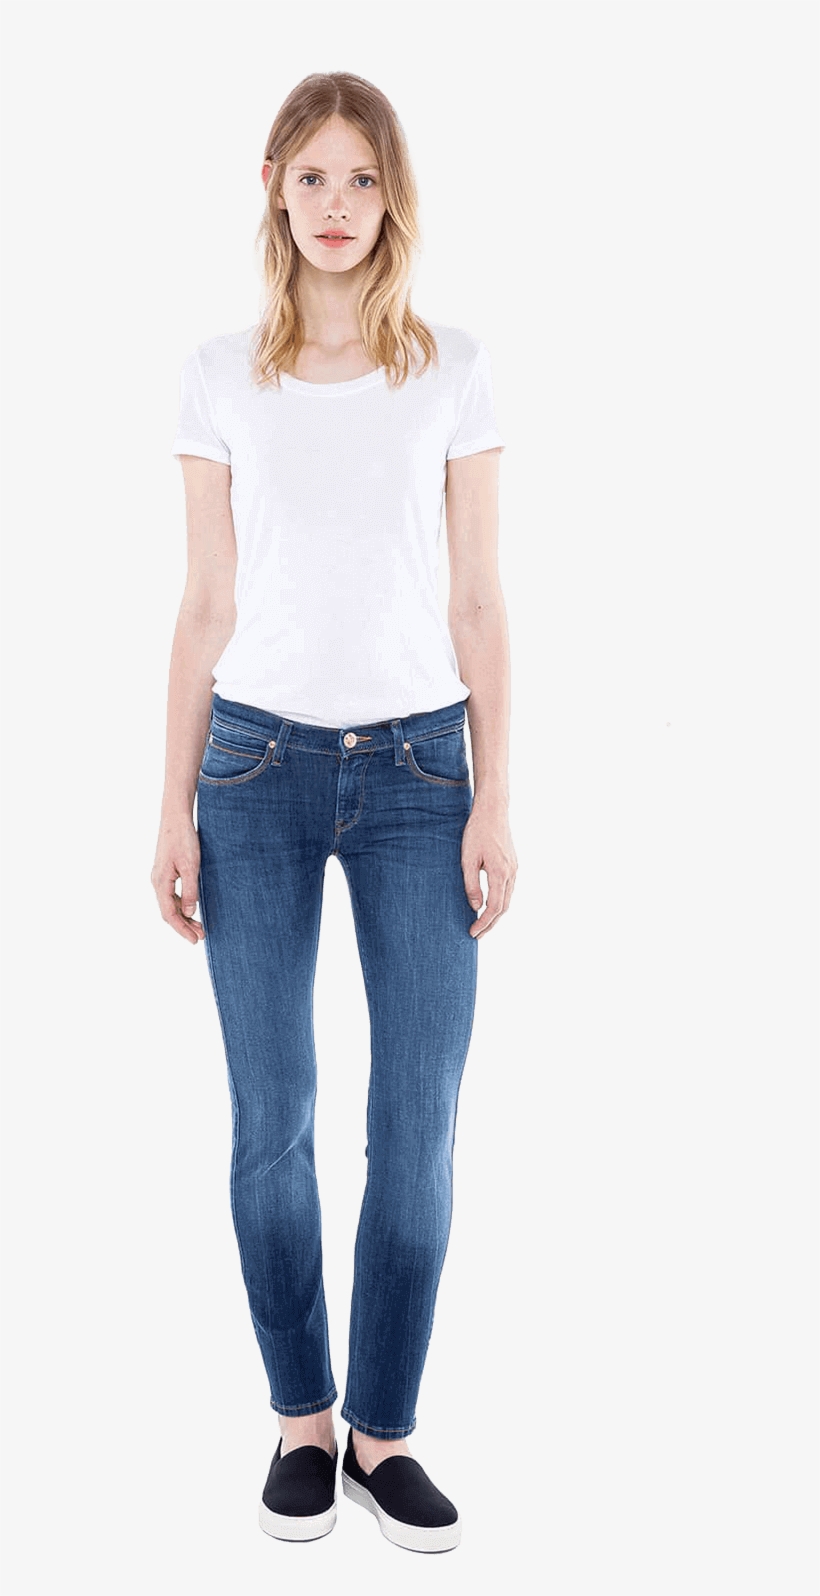 Slim - T Shirt Jeans Woman Png - Free Transparent PNG Download - PNGkey